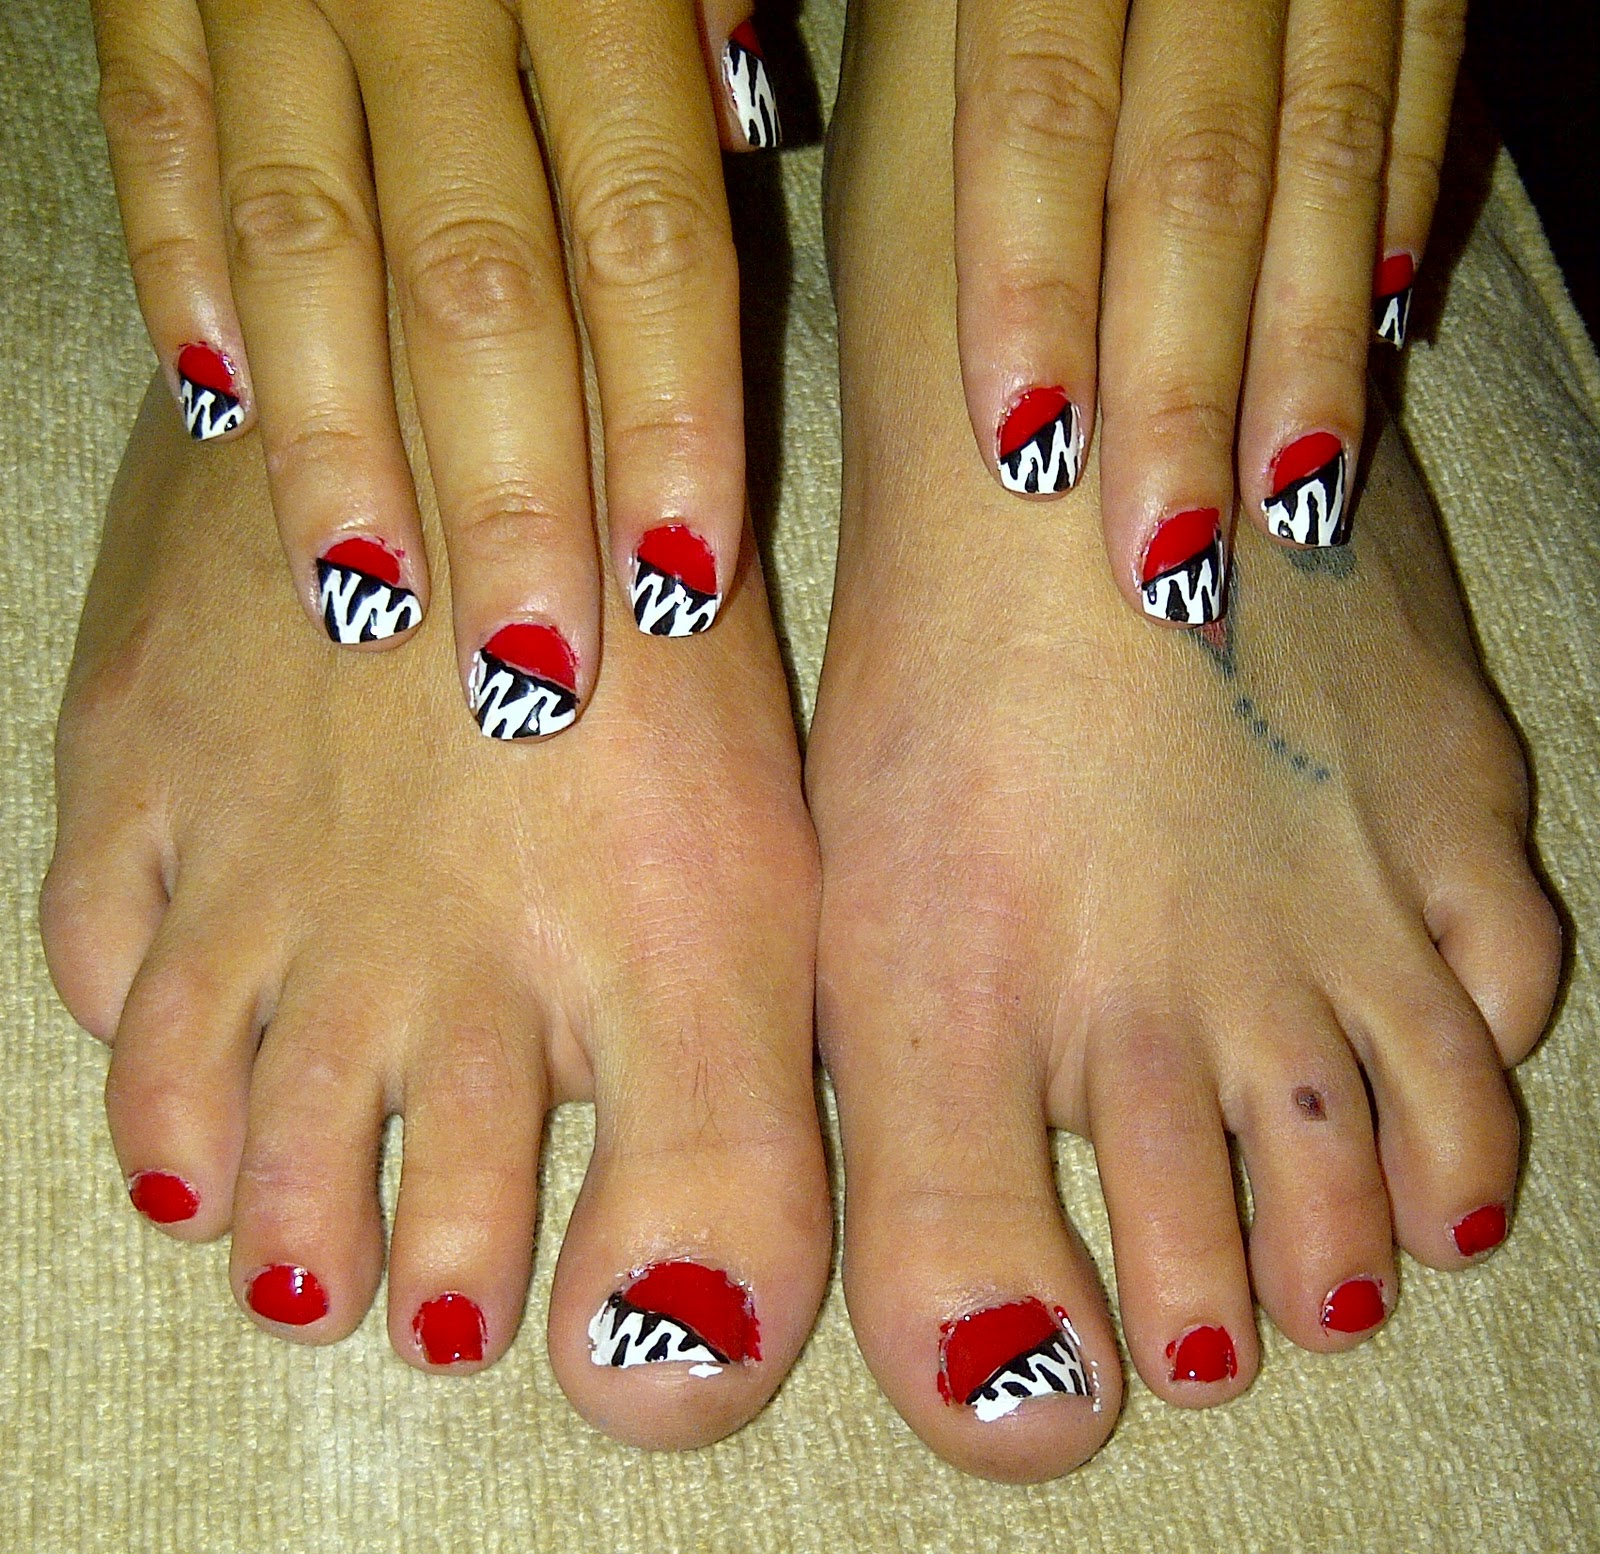 zebra Toes | My nail tech used the Taupless and Barefoot pol… | Flickr